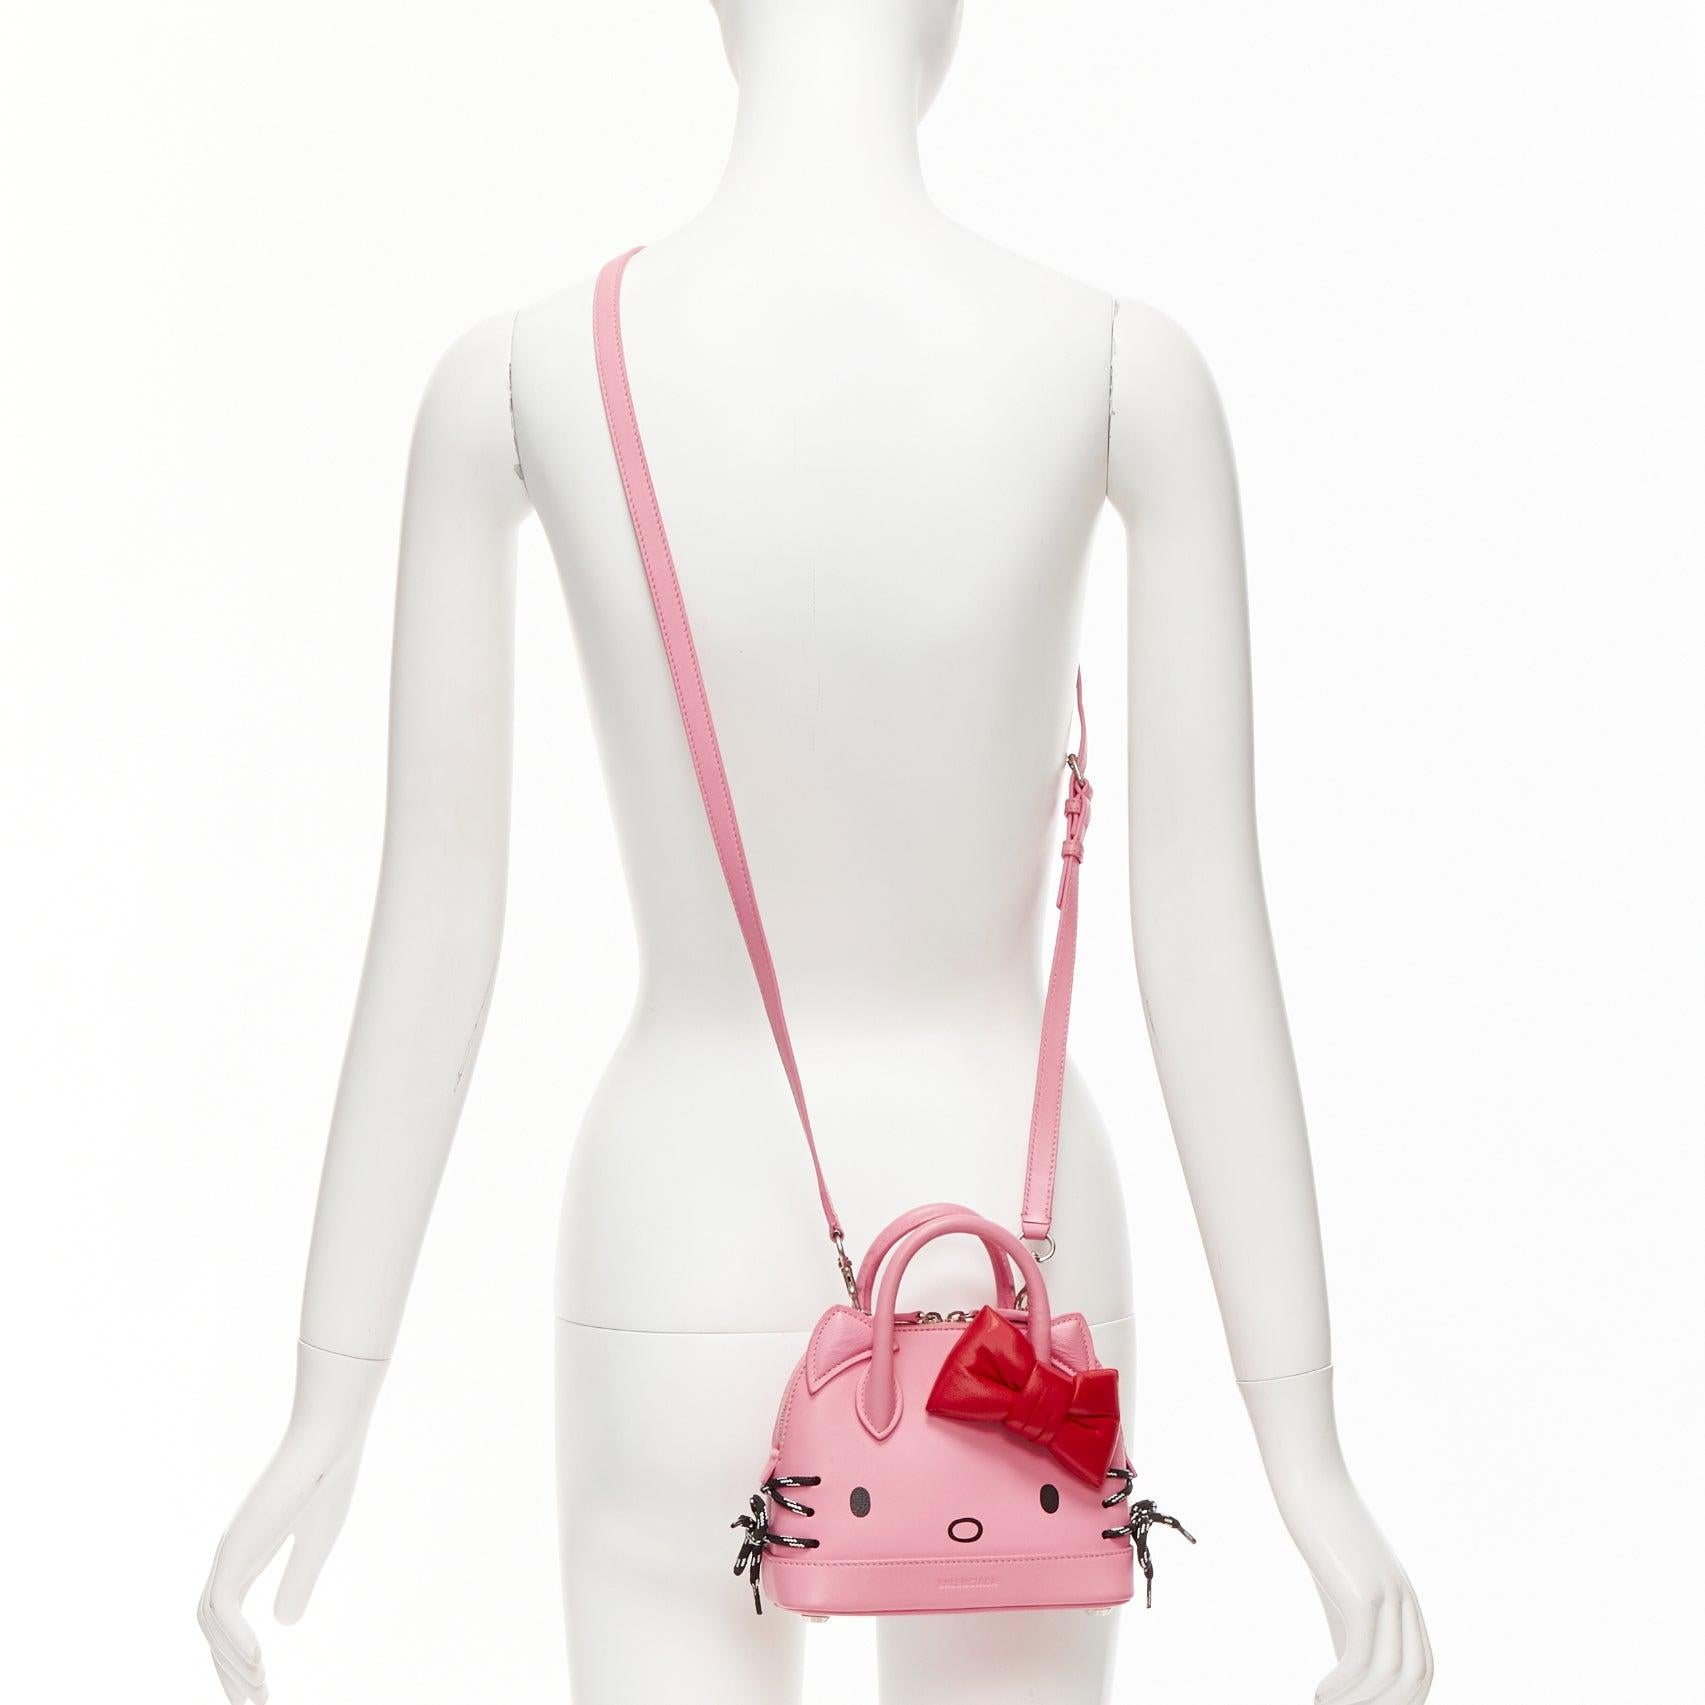 rare BALENCIAGA Hello Kitty Ville pink red leather black laced crossbody bag
Reference: TGAS/D01107
Brand: Balenciaga
Designer: Demna
Model: Ville
Collection: Hello Kitty
Material: Leather
Color: Pink, Red
Pattern: Solid
Closure: Zip
Lining: Black